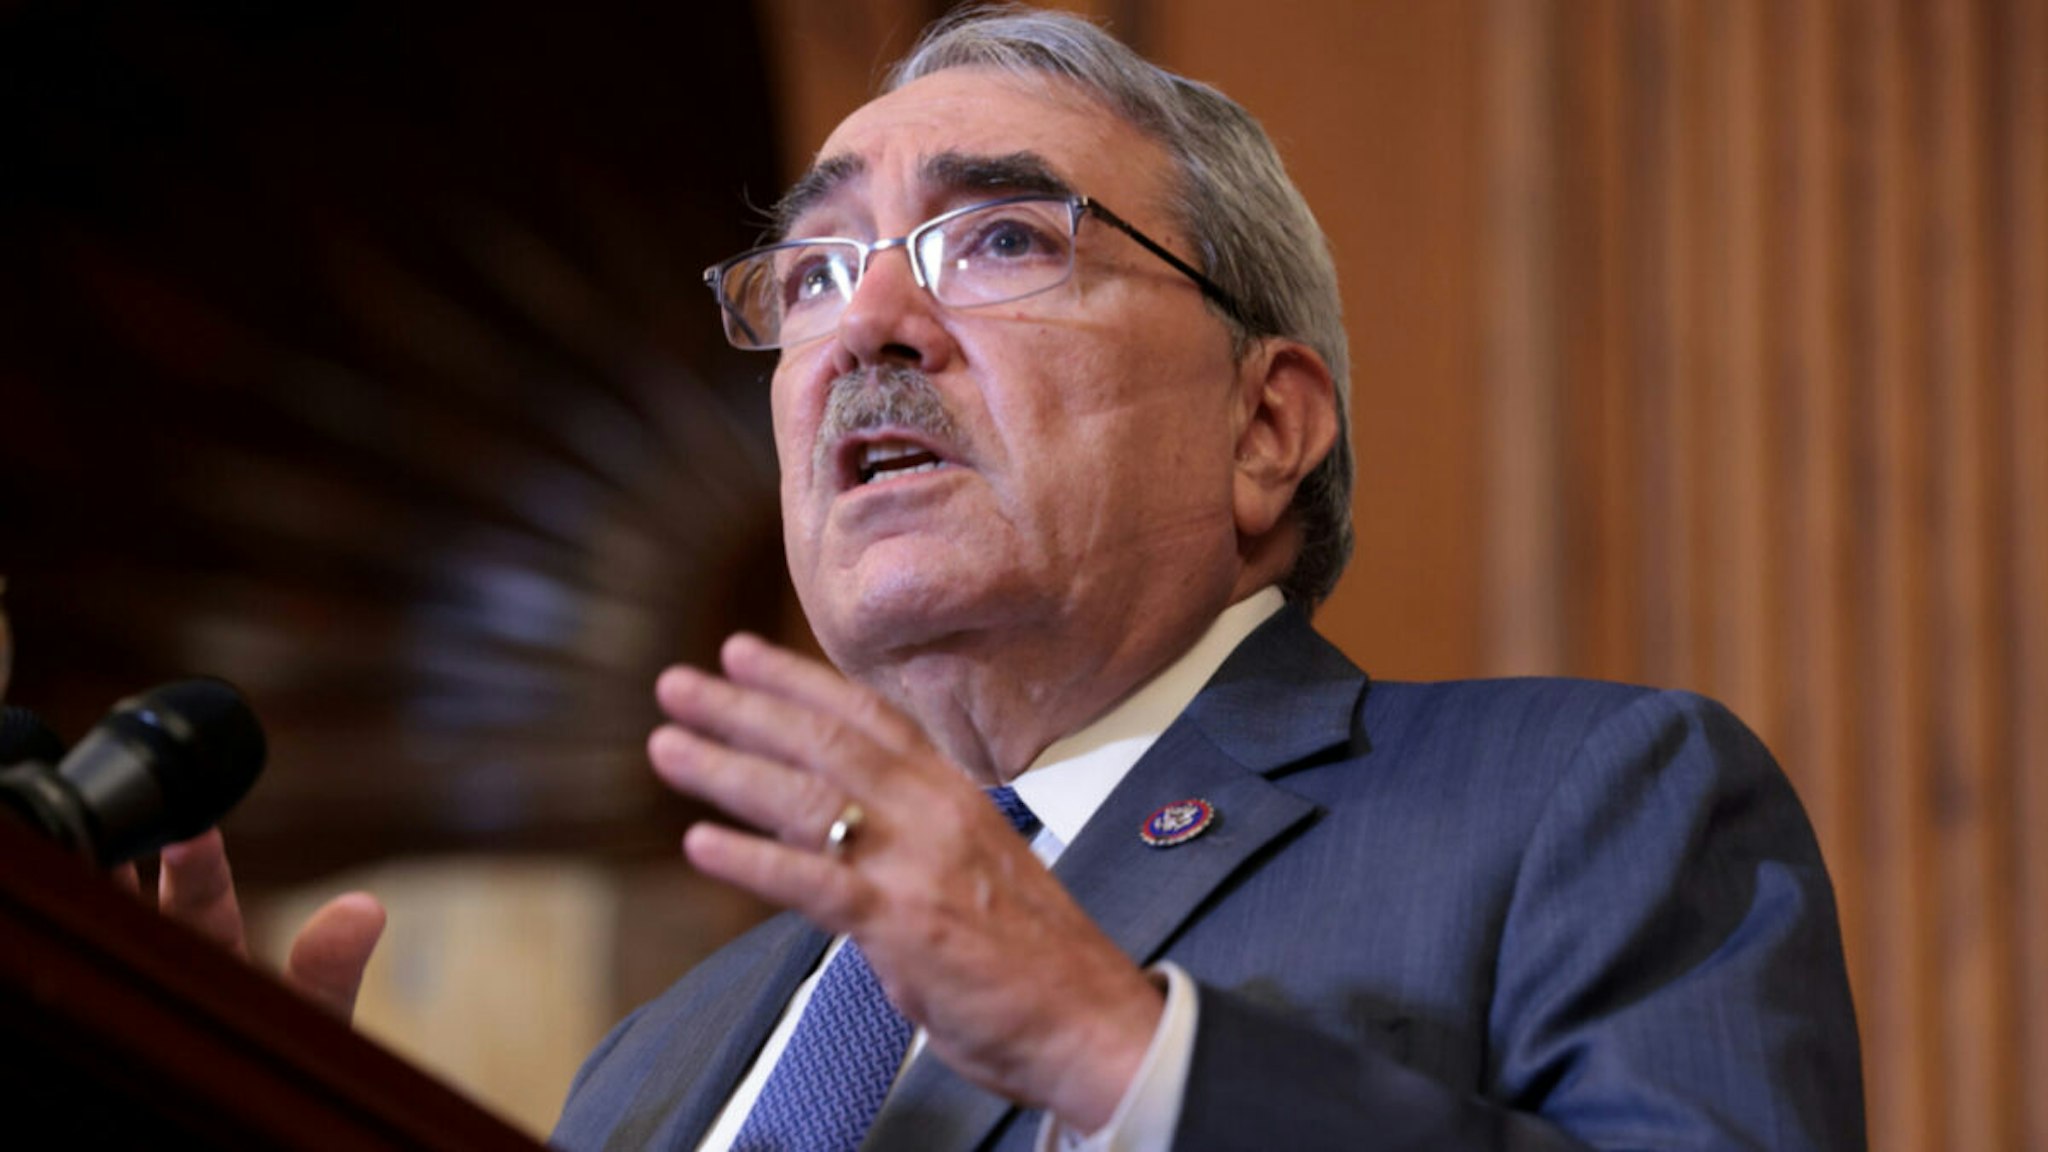 Rep. G.K. Butterfield (D-NC) speaks at a press event following the House of Representatives vote on H.R. 4, the John Lewis Voting Rights Advancement Act, at the U.S. Capitol on August 24, 2021 in Washington, DC.